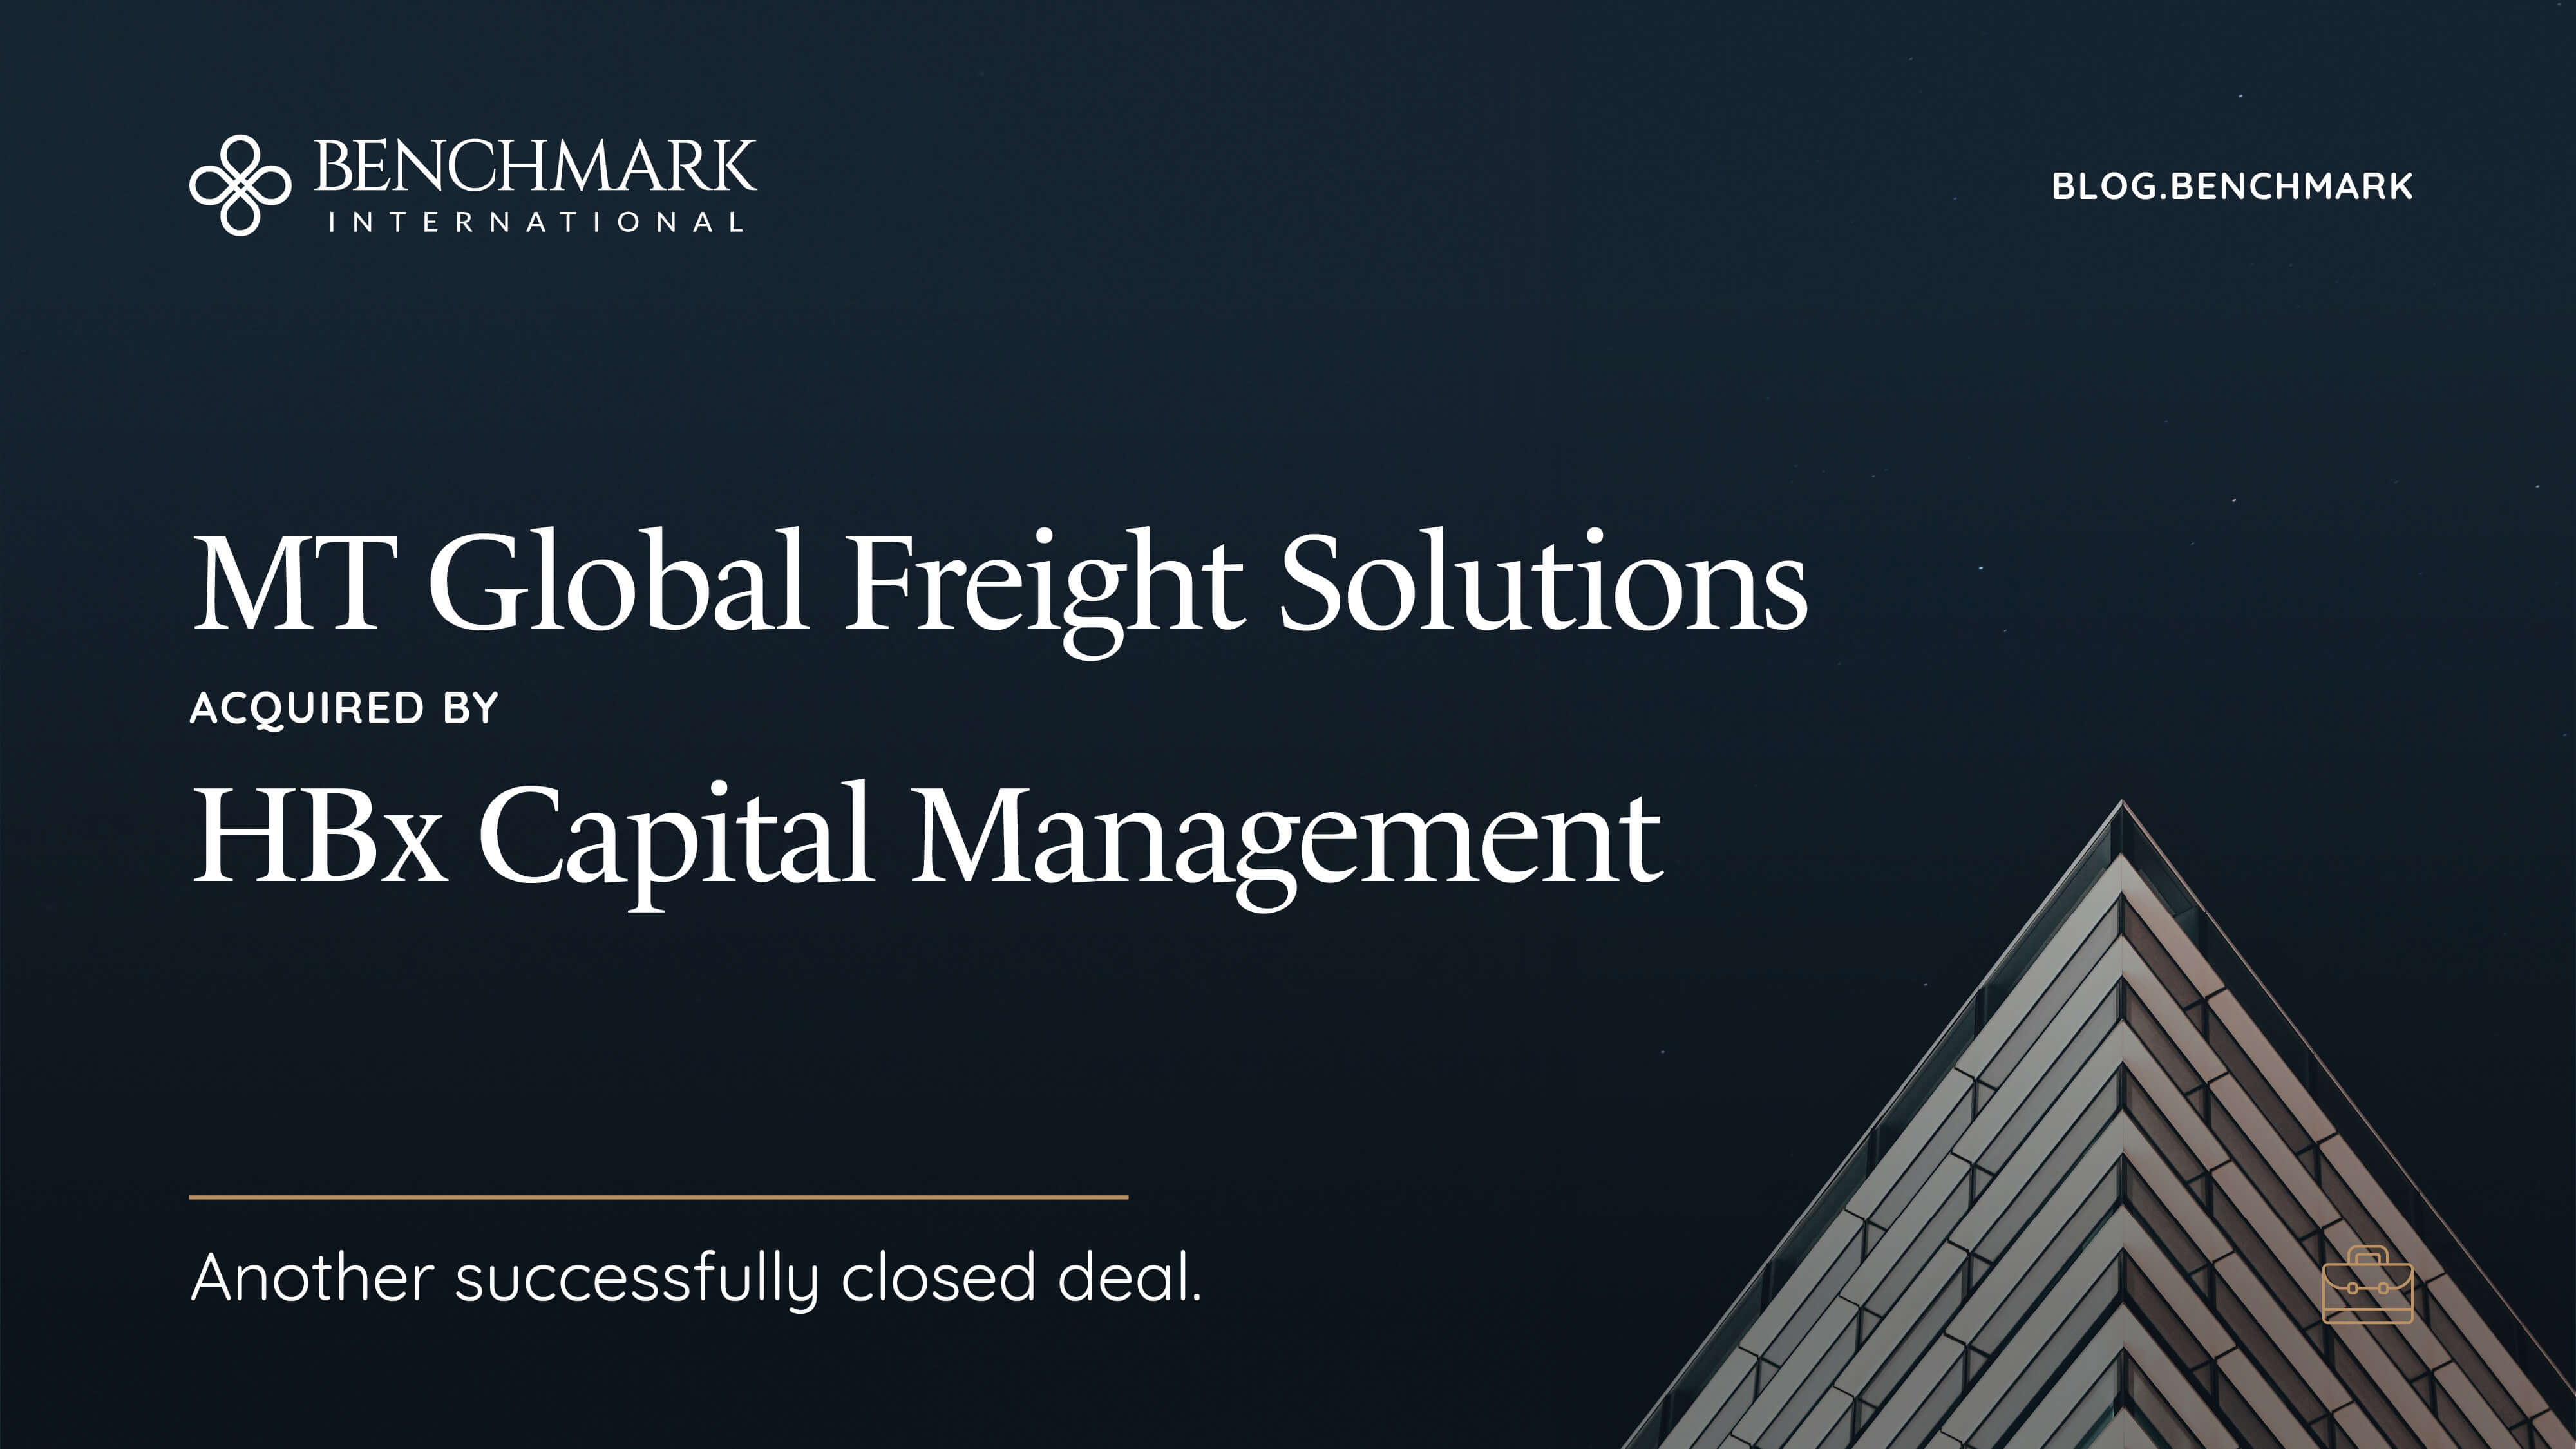 Benchmark International Successfully Facilitated The Transaction Between MT Global Freight Solutions, Inc. And HBx Capital Management